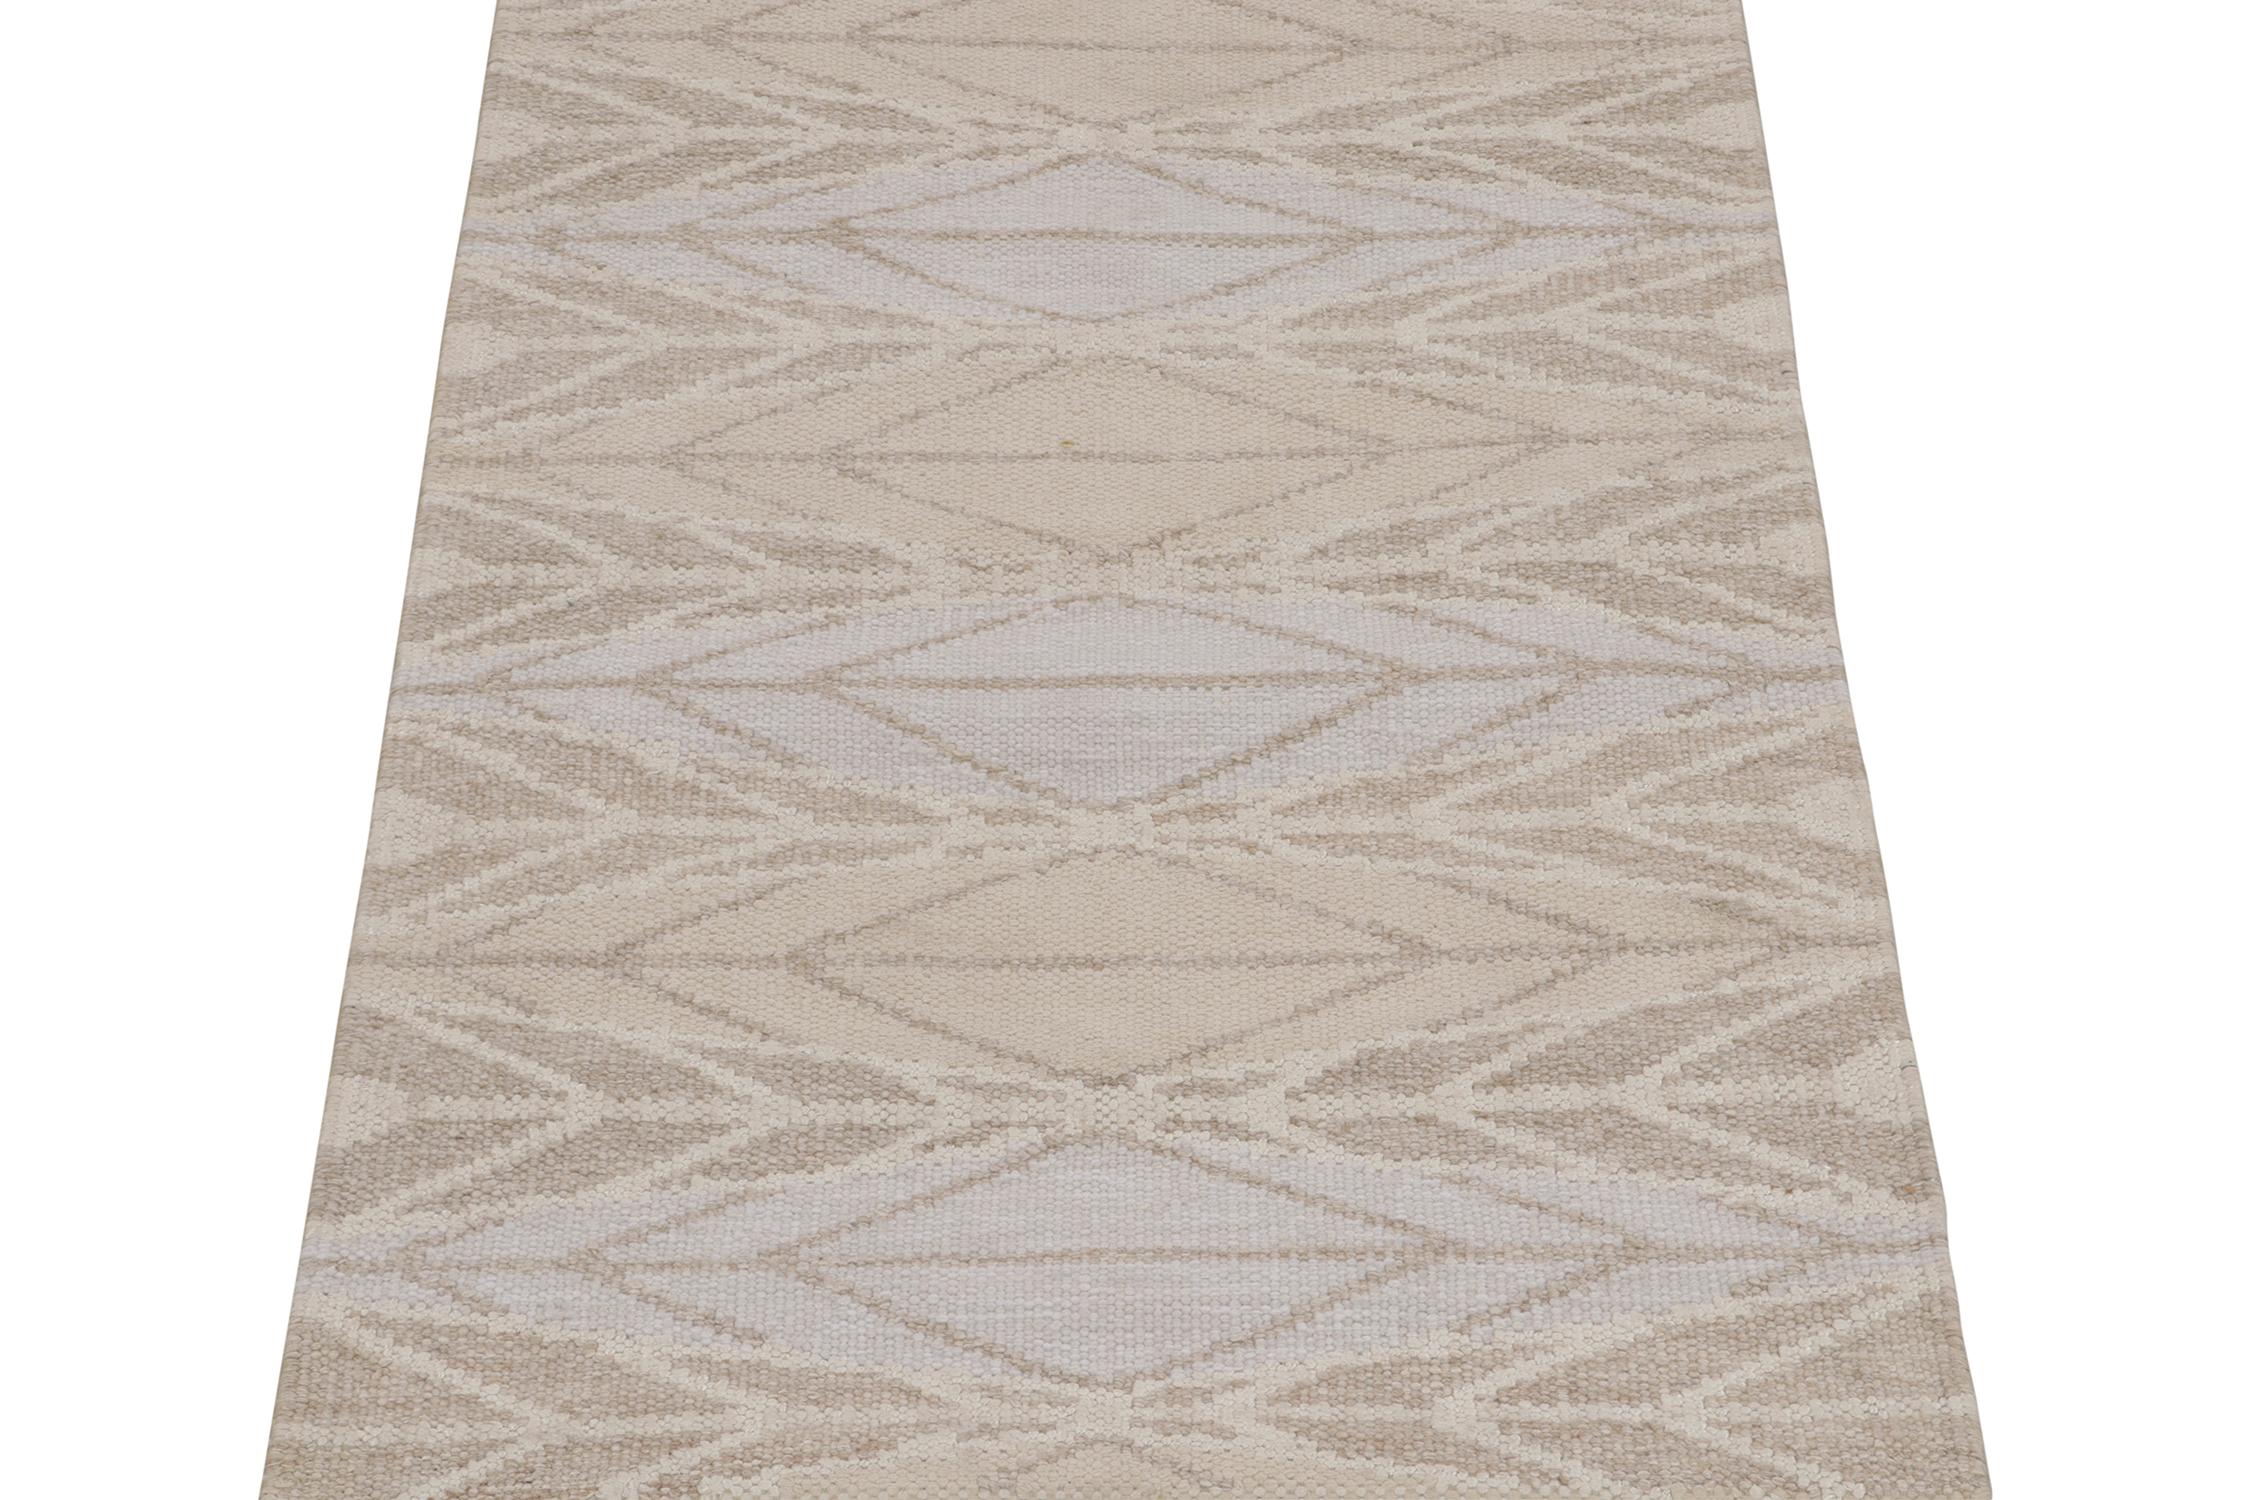 A smart 3x5 Swedish style kilim from our award-winning Scandinavian flat weave collection. Handwoven in wool. 
On the design: 
This rug enjoys a mesmeric sense of movement with finely detailed geometric patterns in beige, white, gray, and blue. Keen